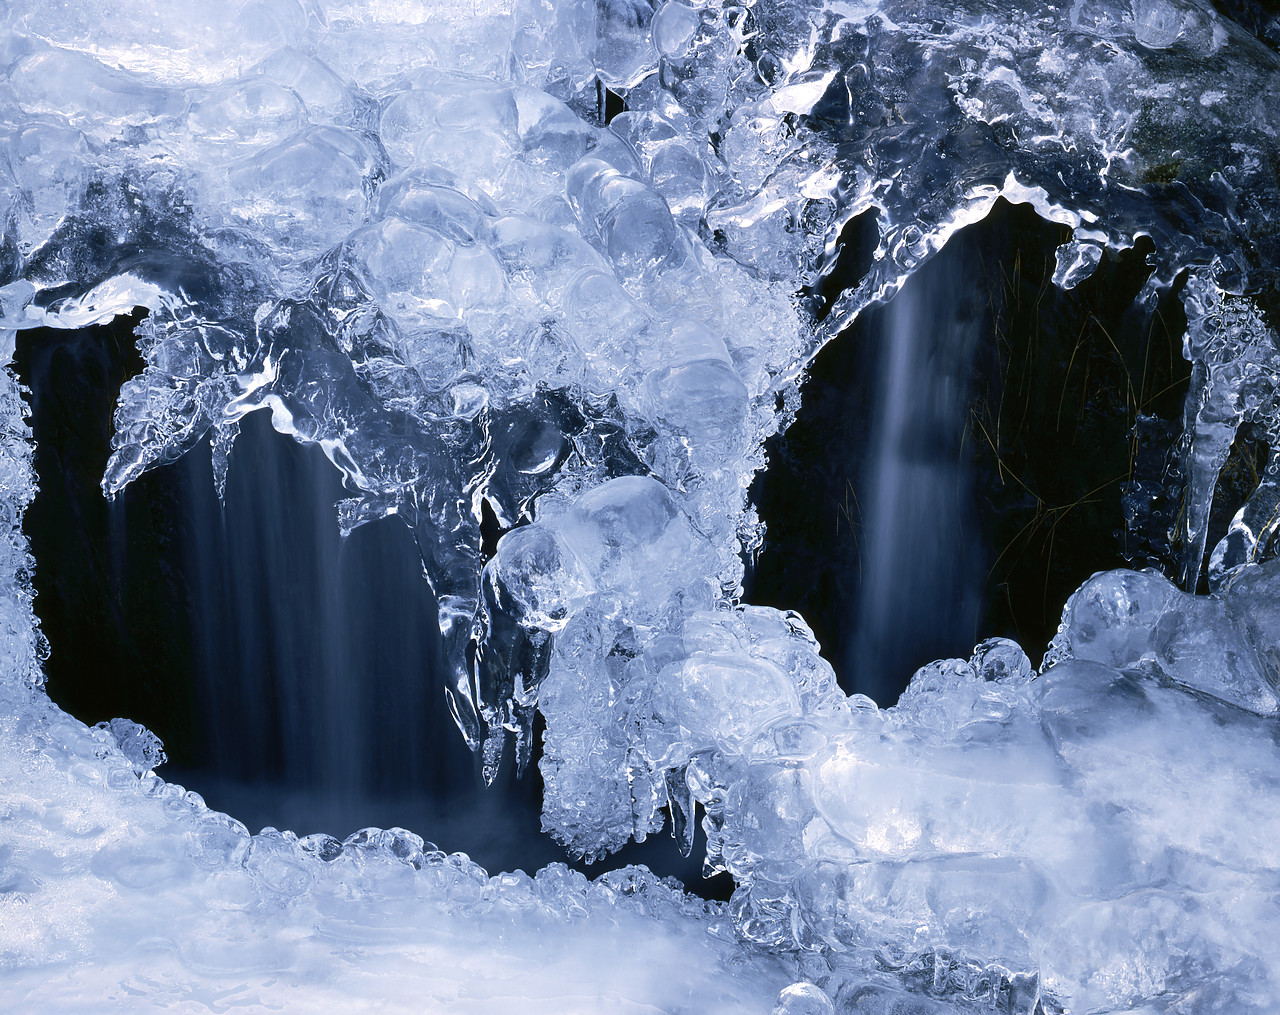 #923889-1 - Ice Shapes in front of Waterfall, Lake District, Cumbria, England